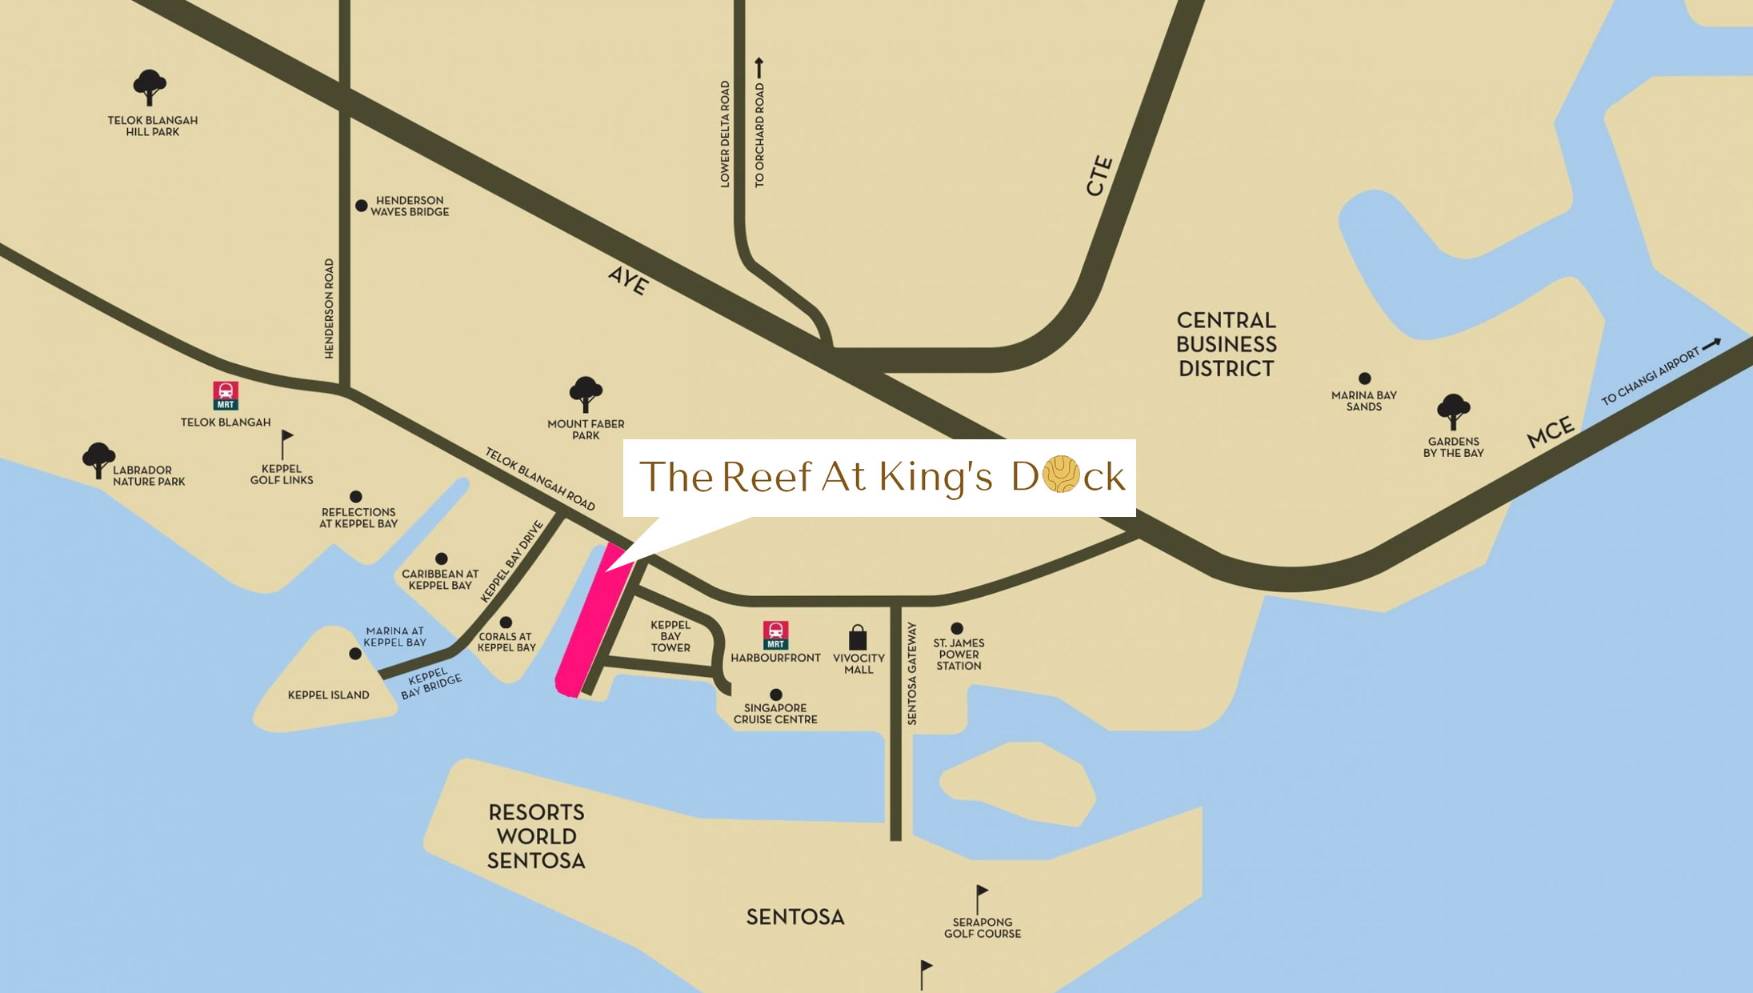 The Reef at King's Dock image